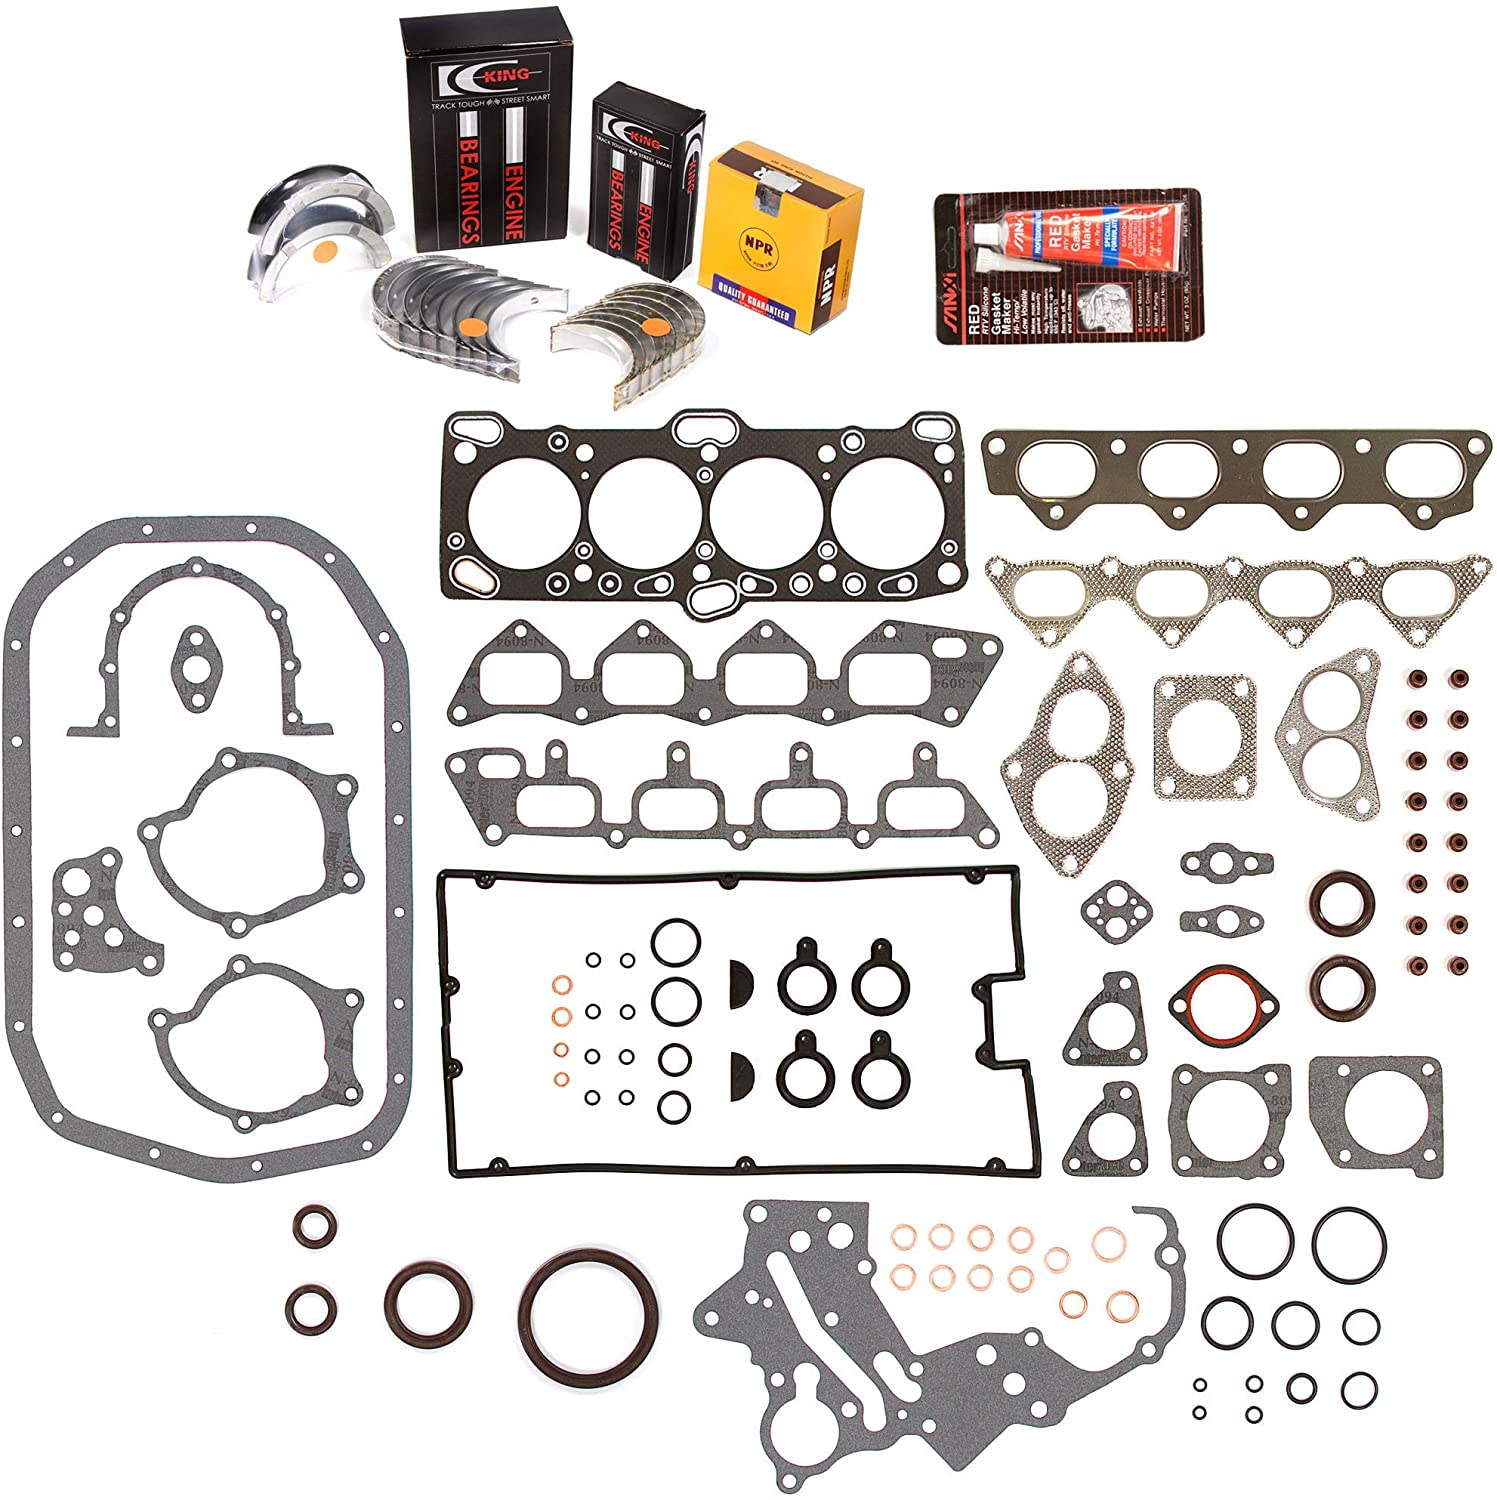 Evergreen Engine Rering Kit FSBRR5005��� Compatible With 89-92 Mitsubishi Eagle Plymouth 2.0 4G63 4G63T Full Gasket Set, Standard Size Main Rod Bearings, Standard Size Piston Rings (Pistons Standard Main Standard | Rod Standard)